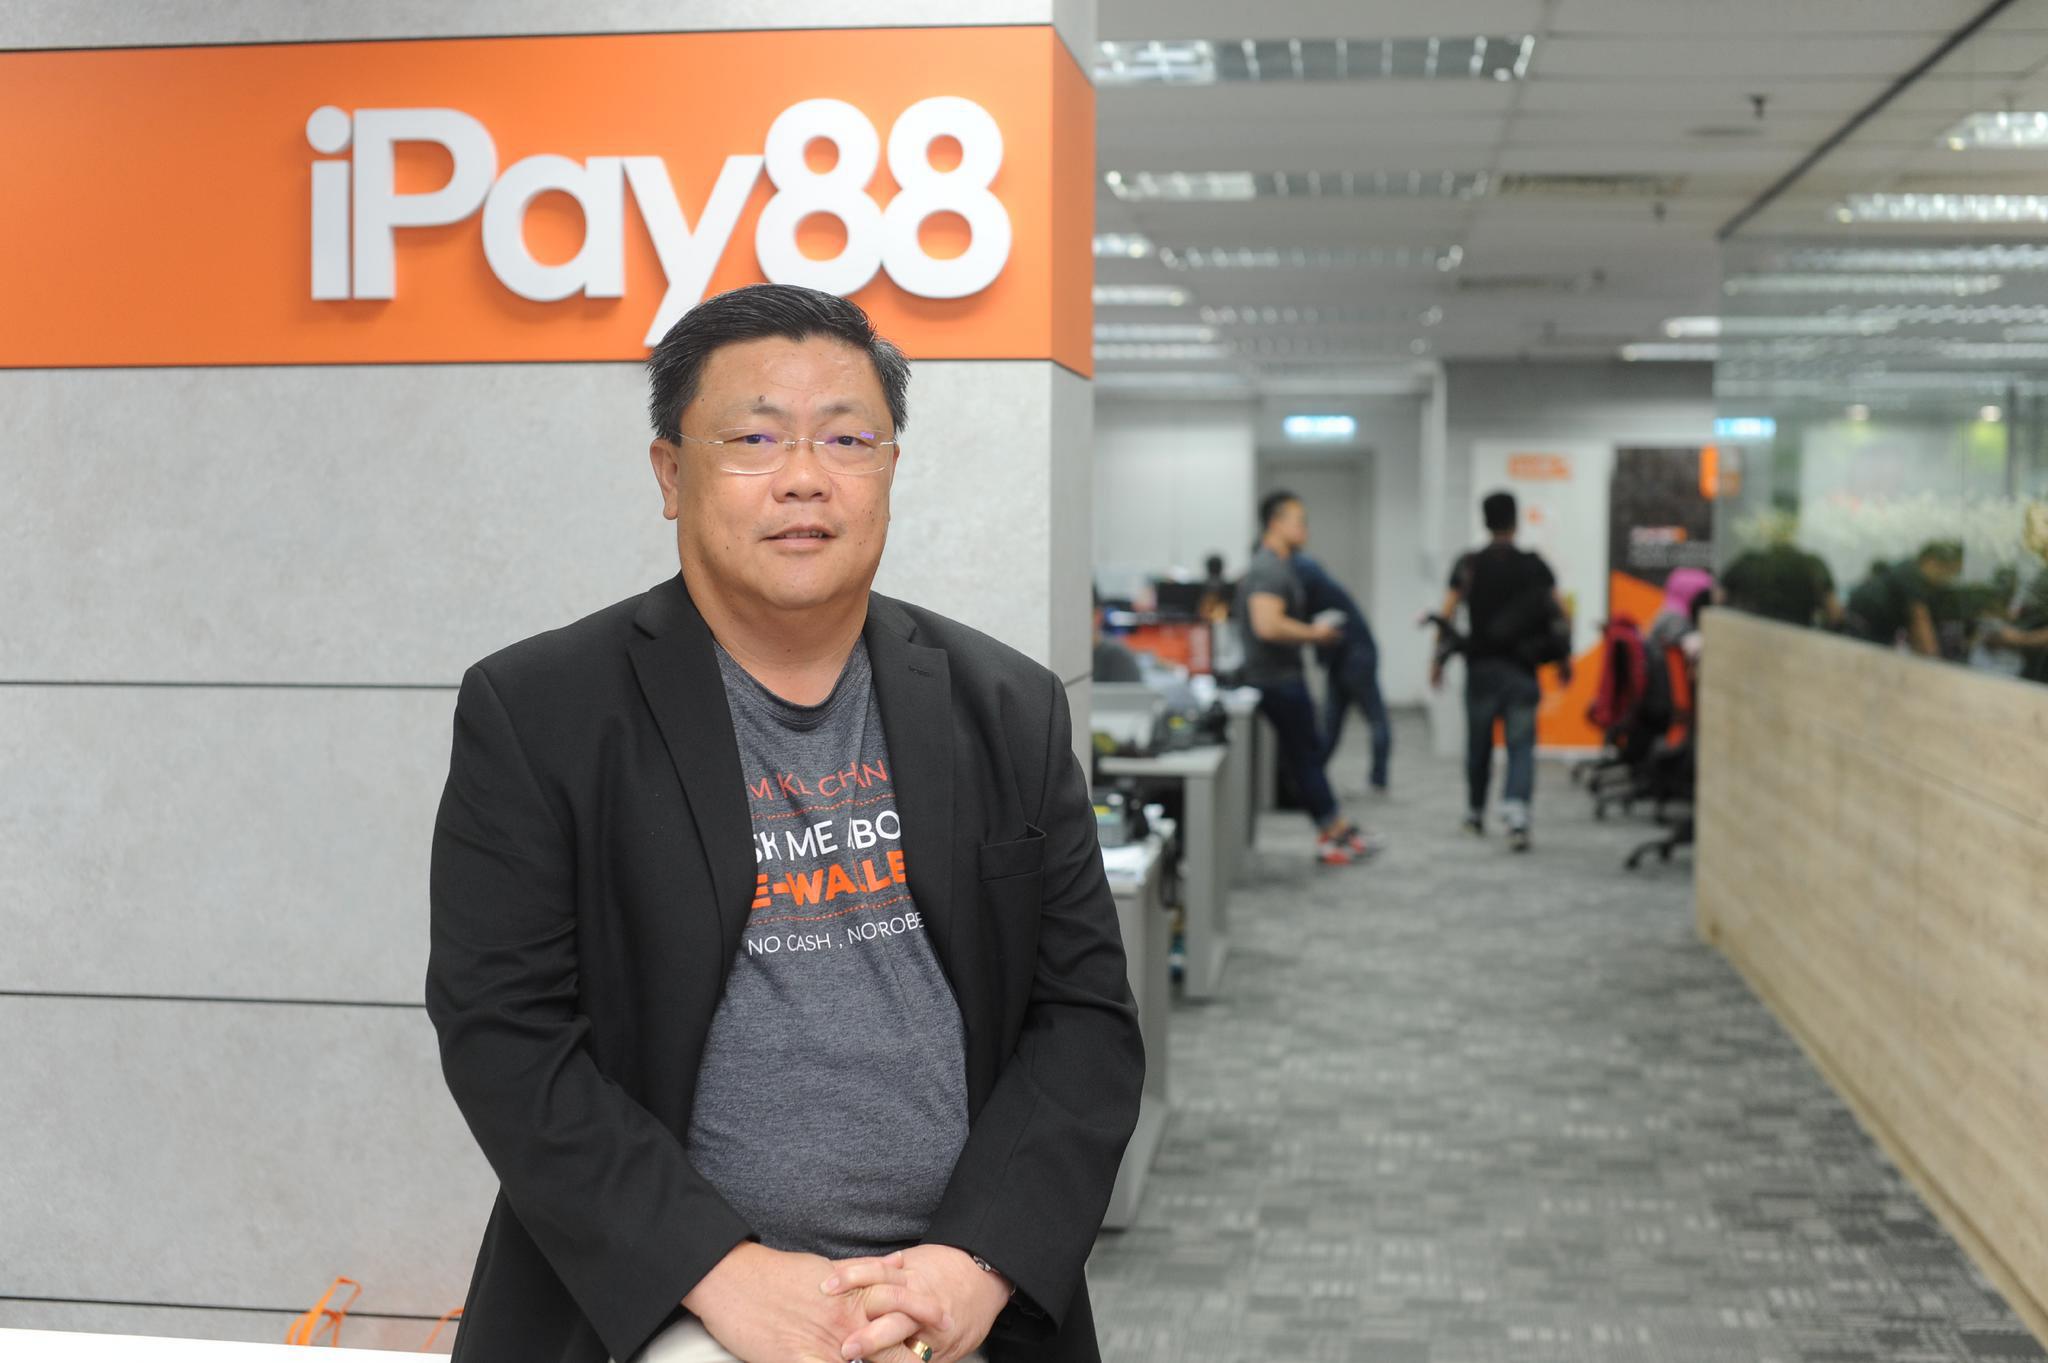 iPay88 Shares ‘Payment Dream’ that rides on IoT